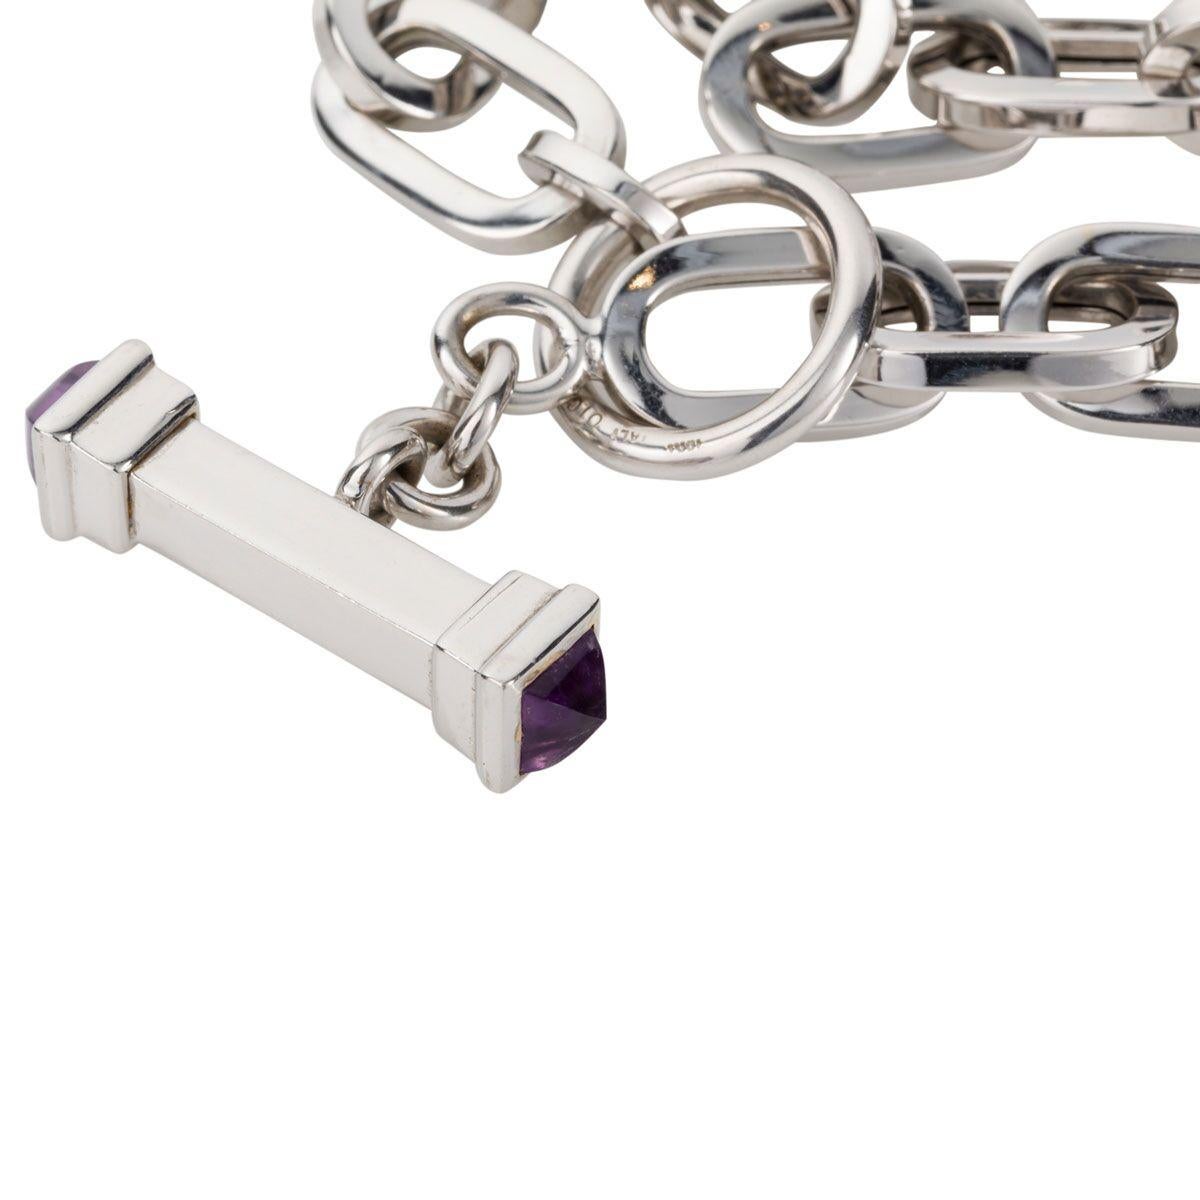 Contemporary 18 Karat White Gold Chain Link Necklace with Amethyst Toggle Clasp